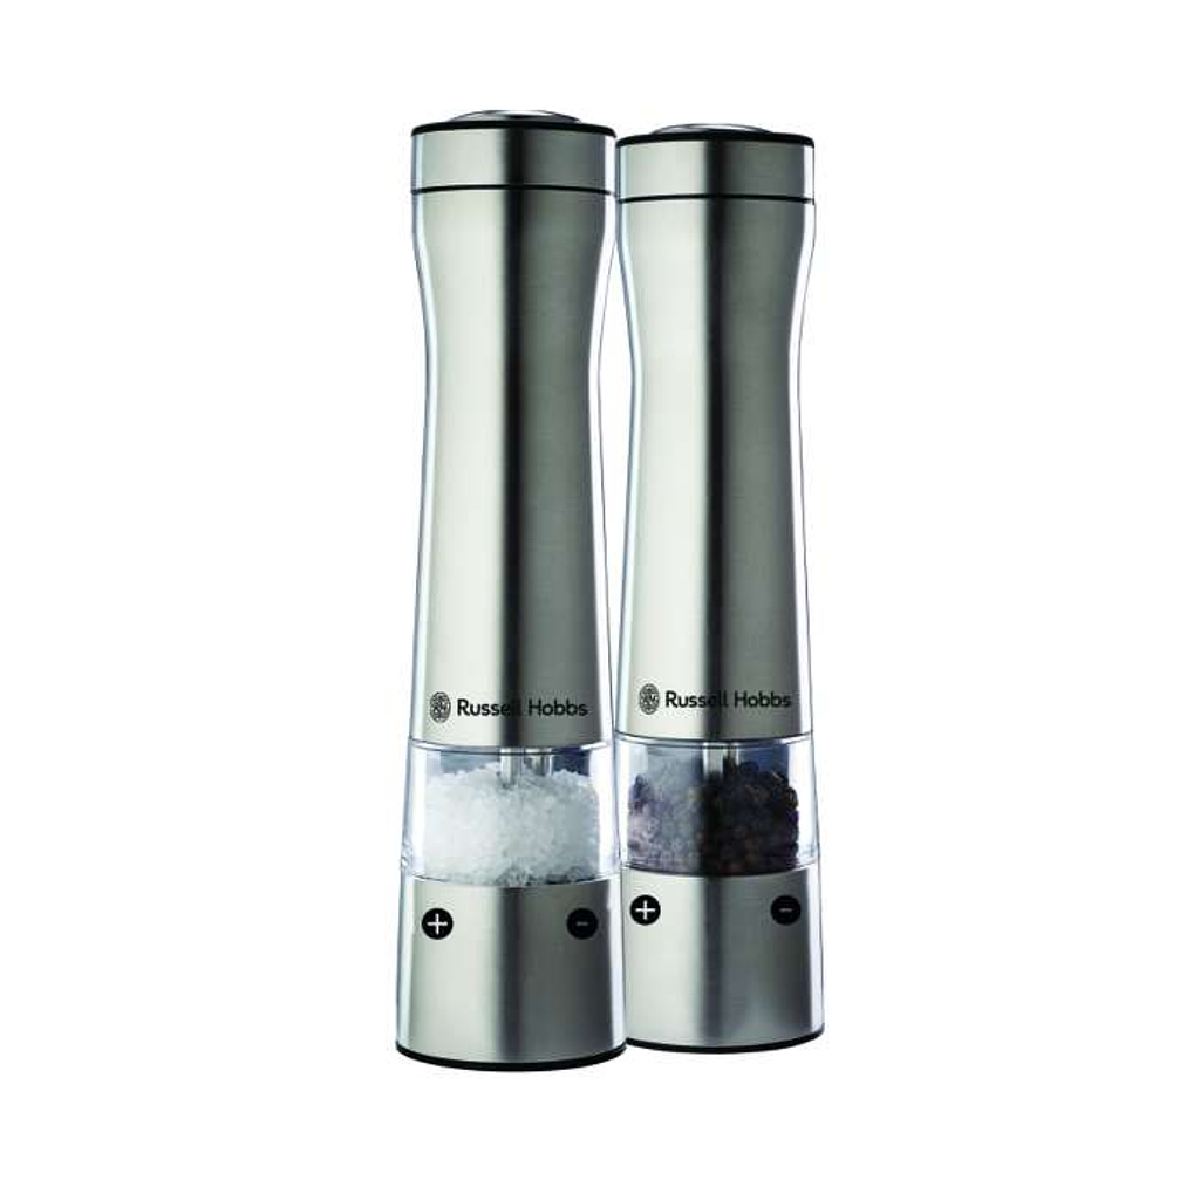 Russell Hobbs Electric Salt and Pepper Mill